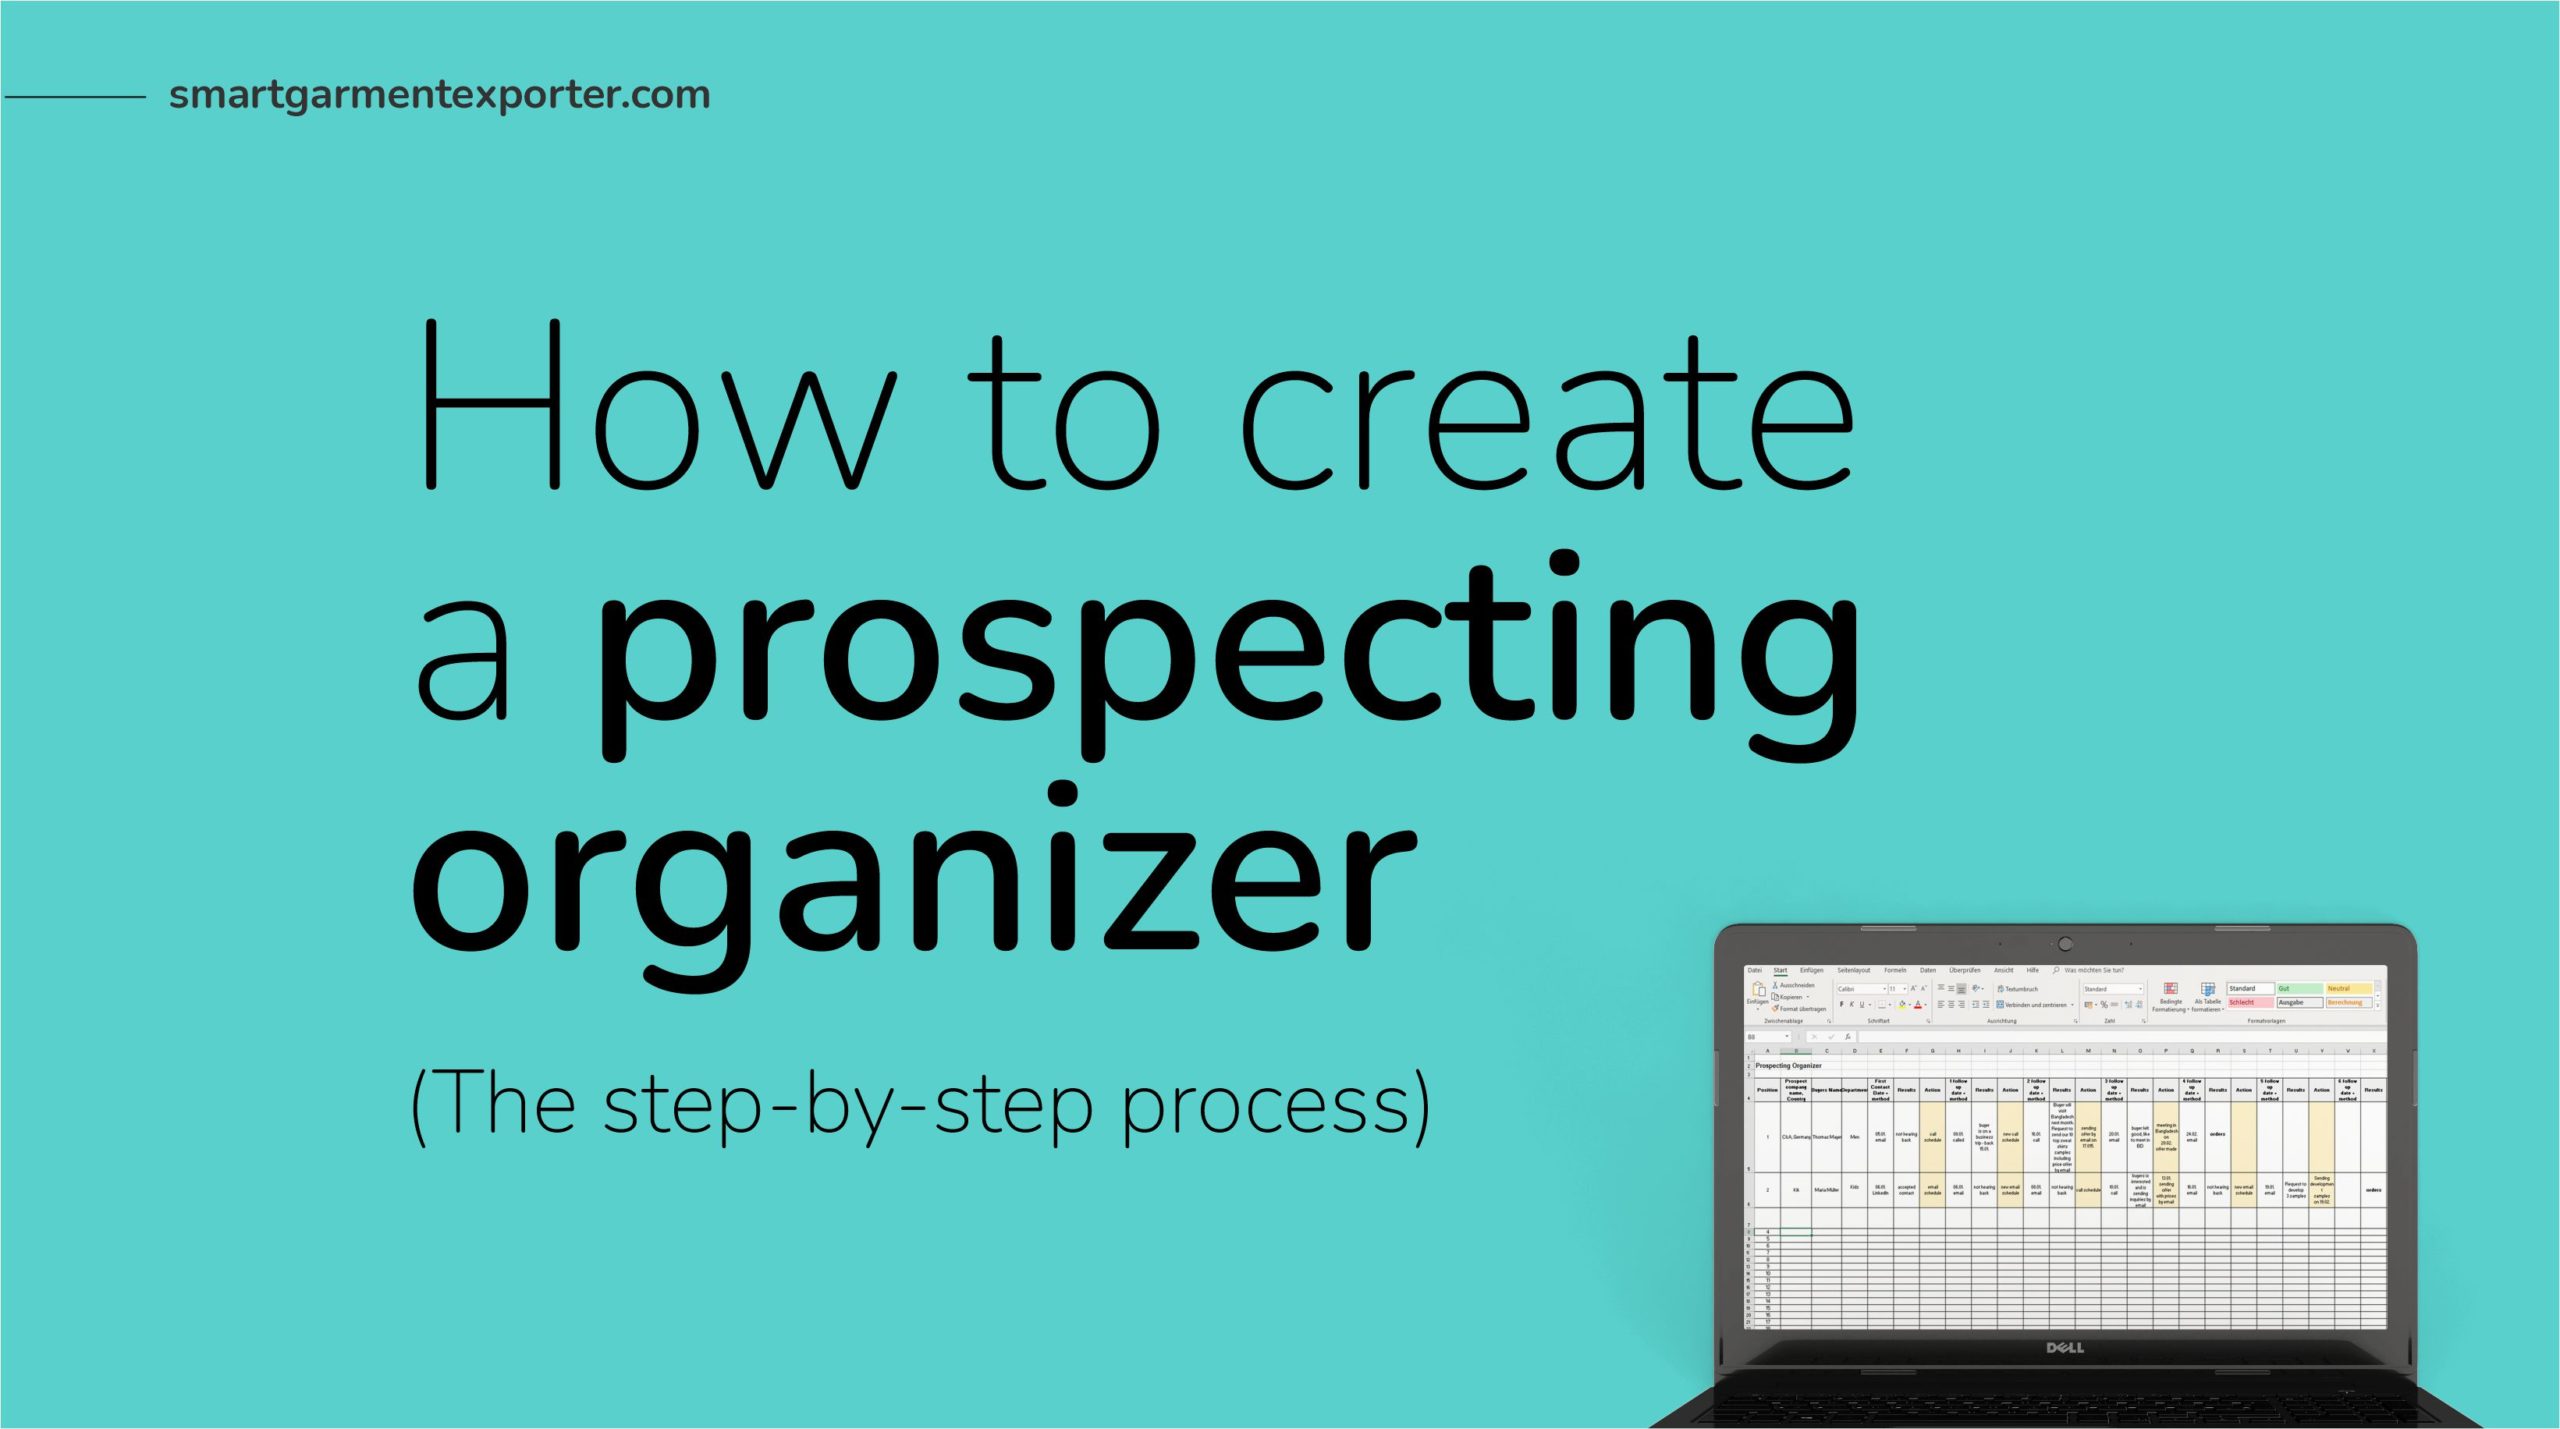 How to create a prospecting organizer to make it easy to reach out to new garment buyers daily